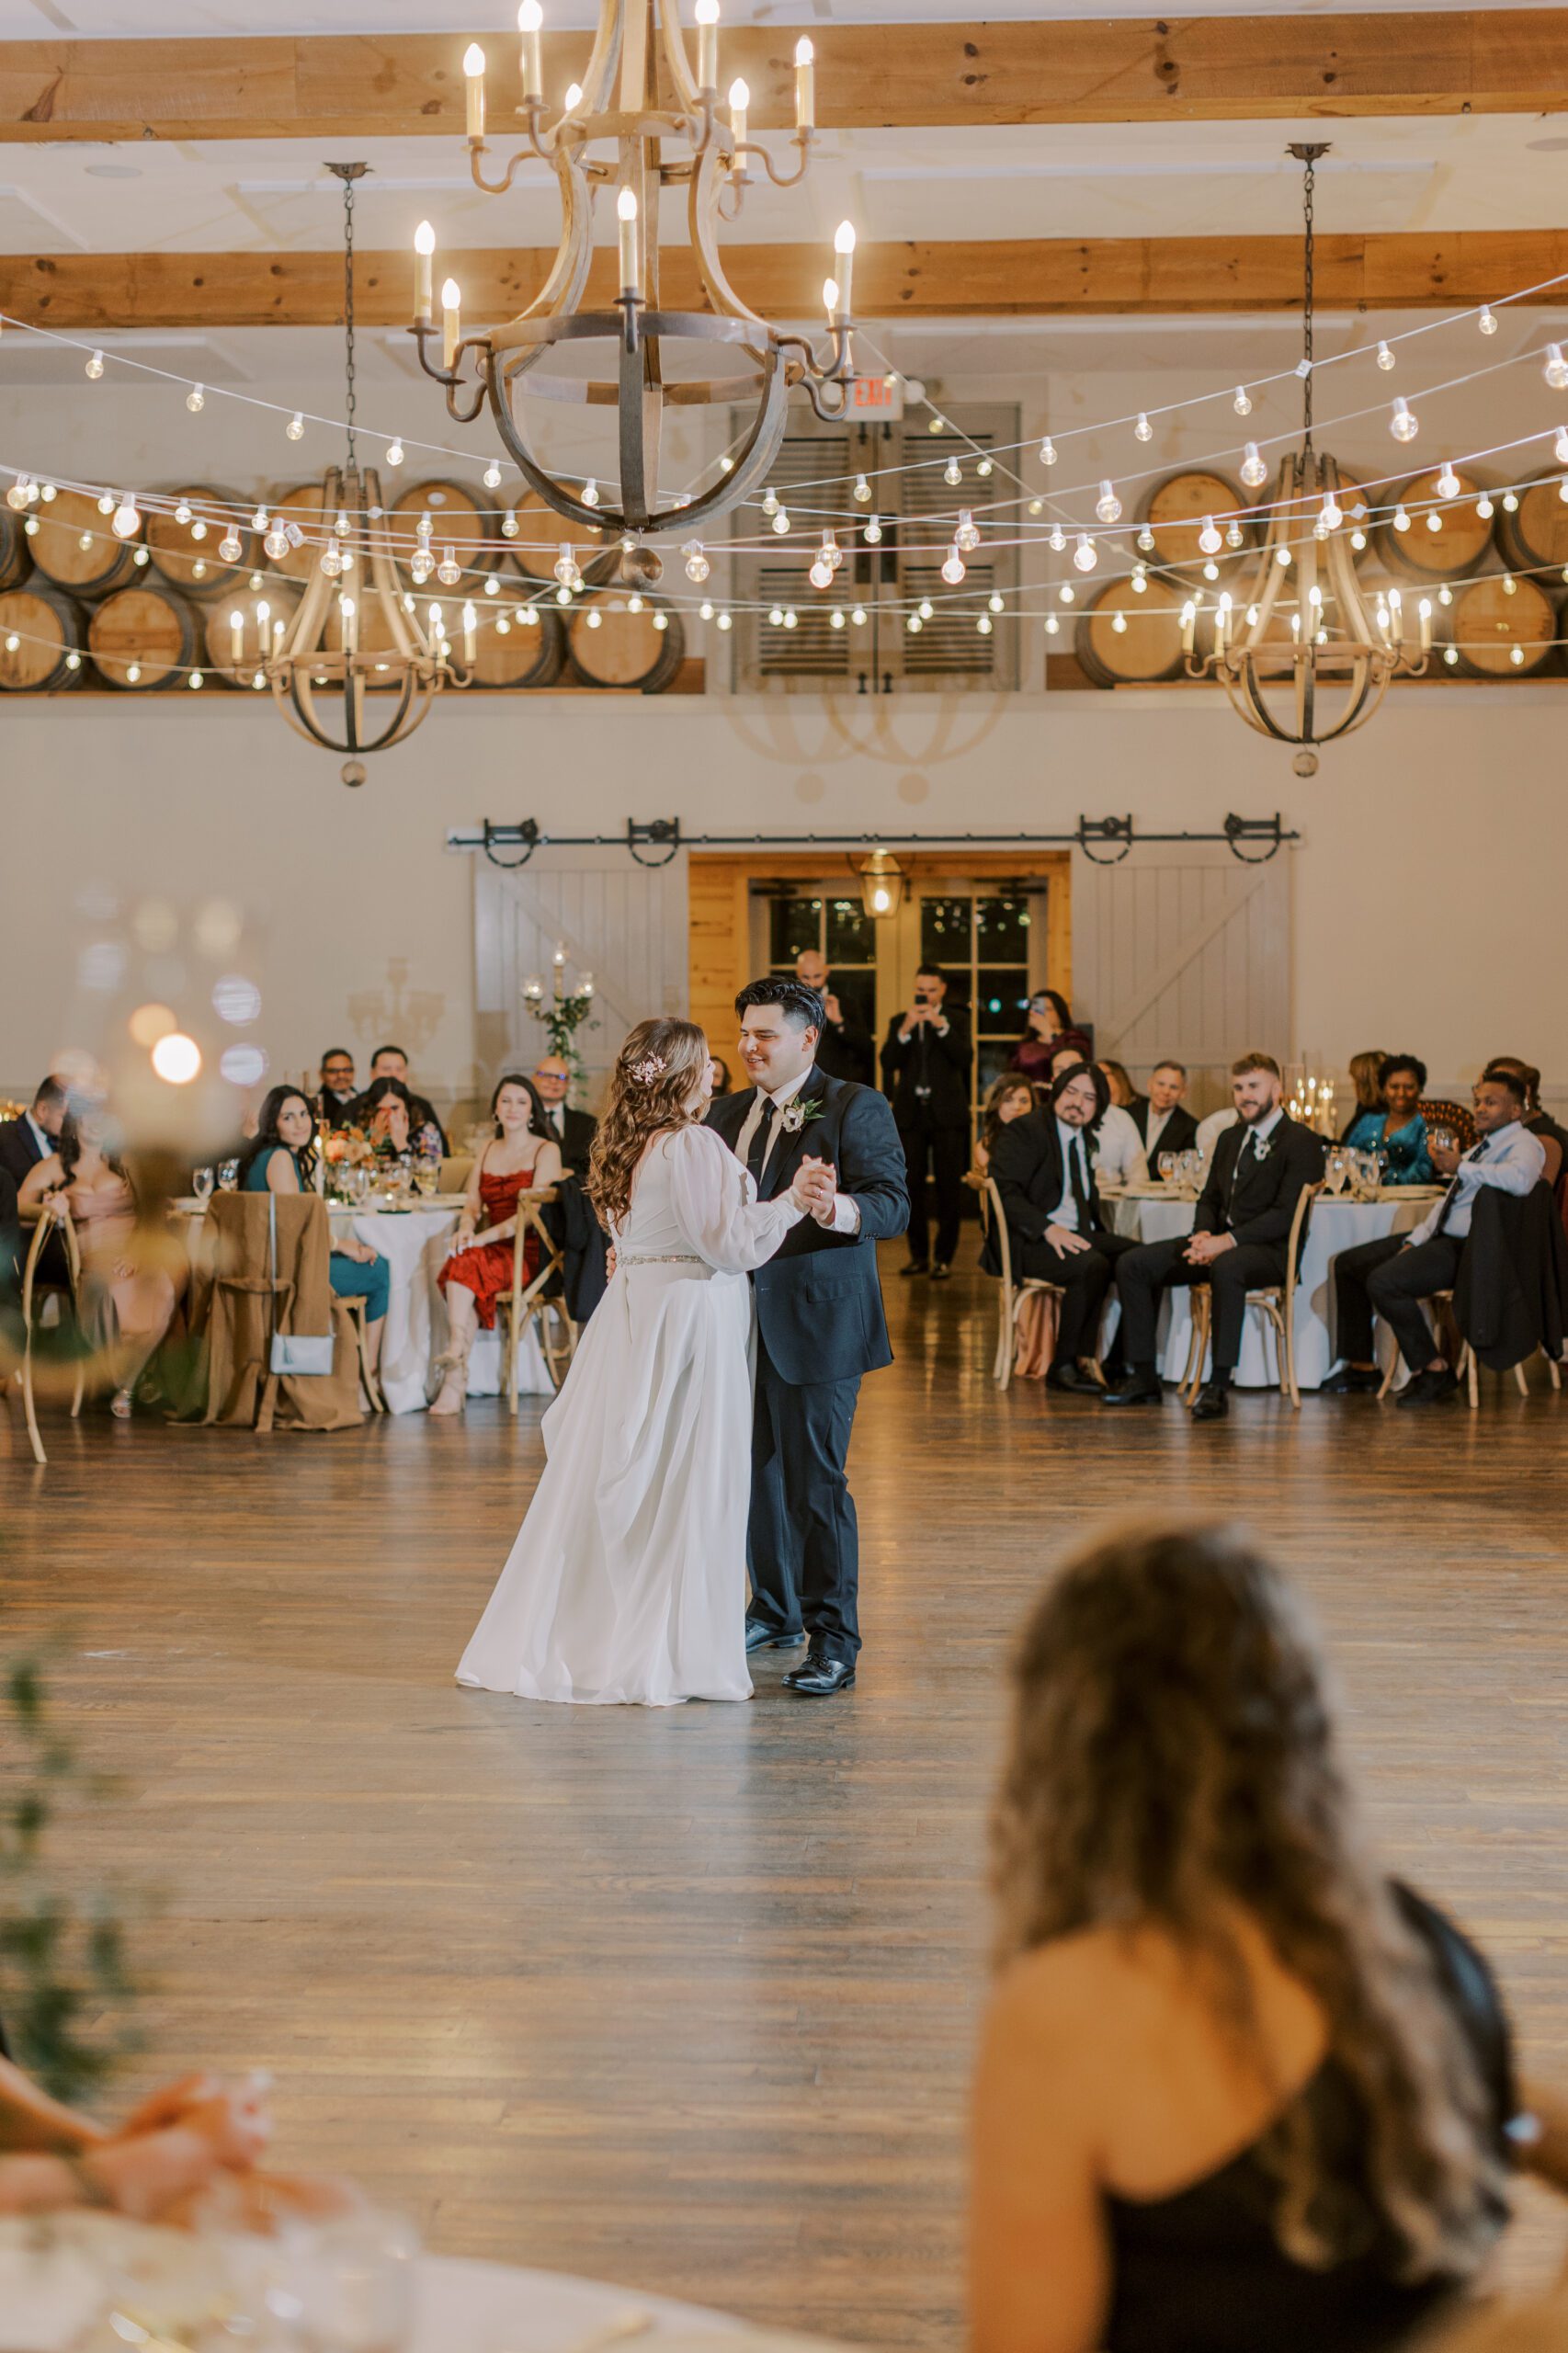 Bride and groom share a dance in their reception as guests sit at tables watching, chandelier and string lights hand overhead